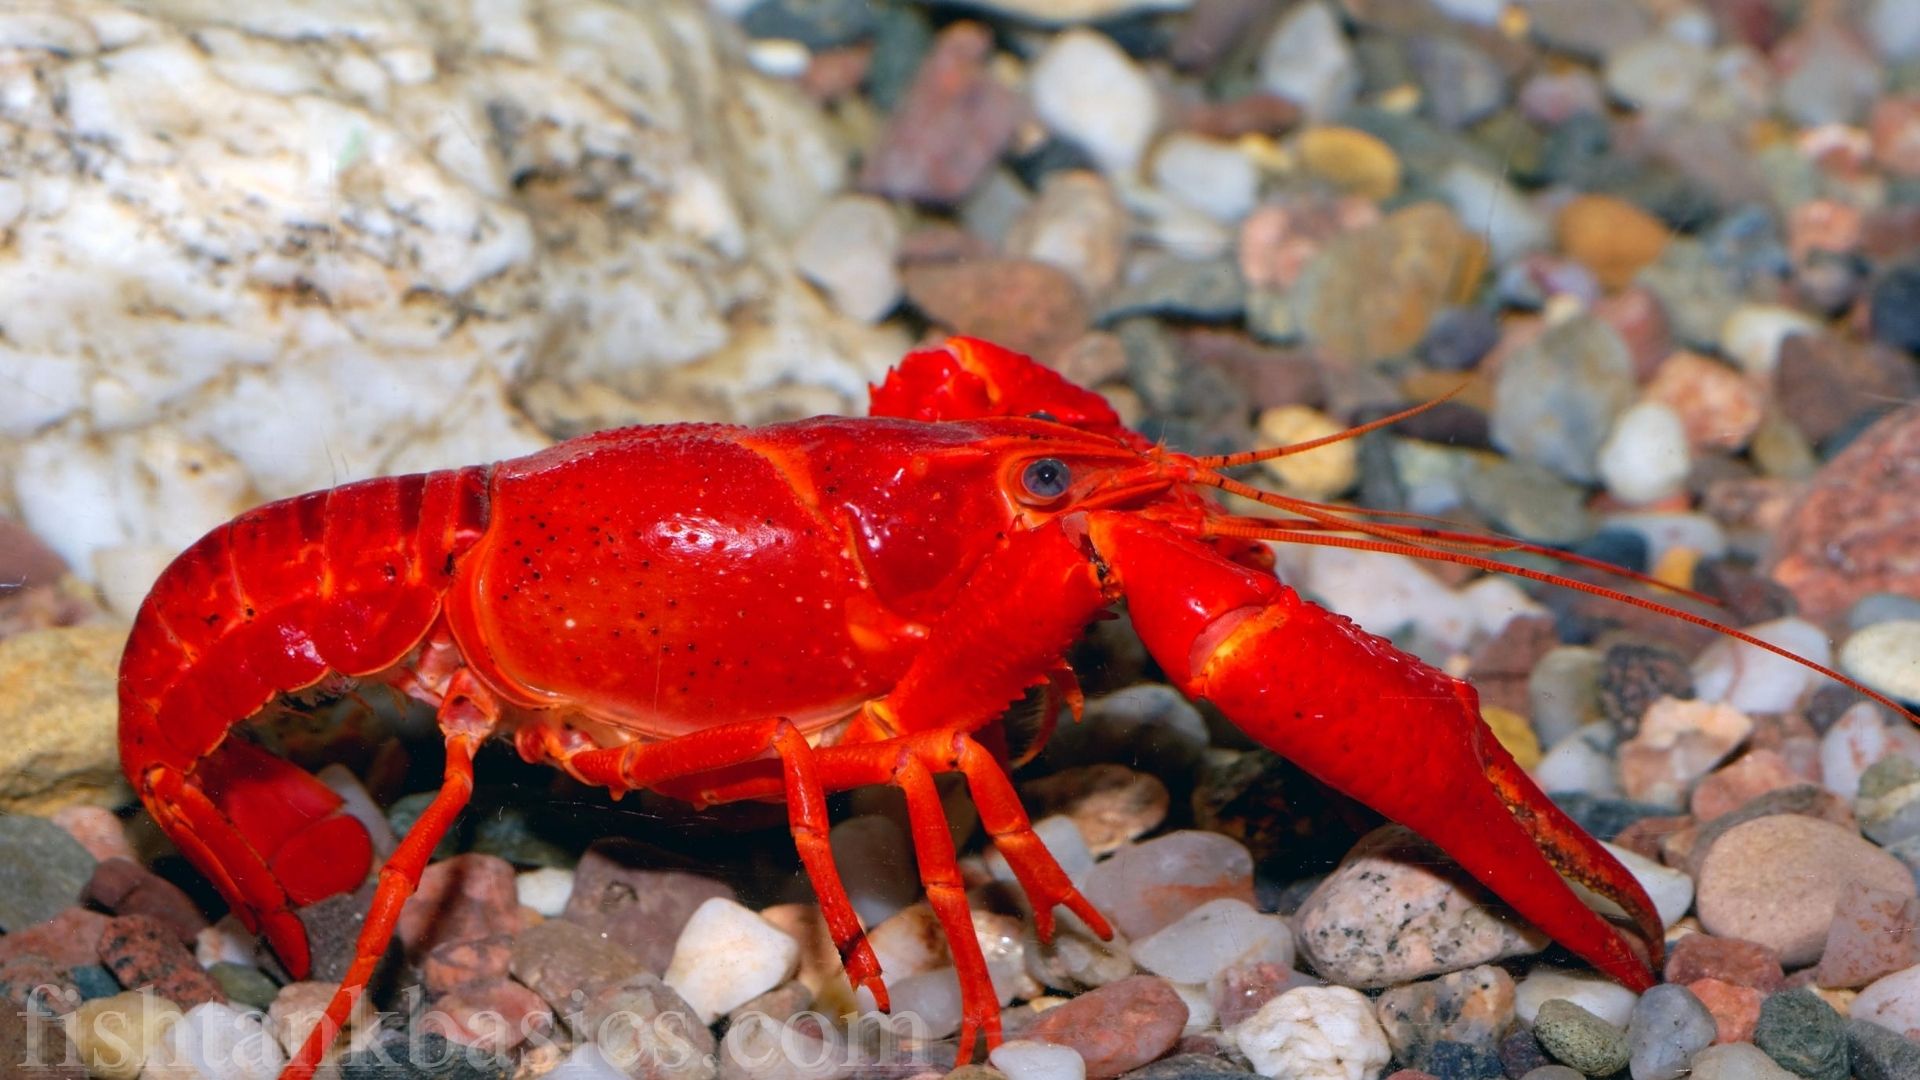 Tangerine Lobster Care: Size, Lifespan, Color, Diet – Video